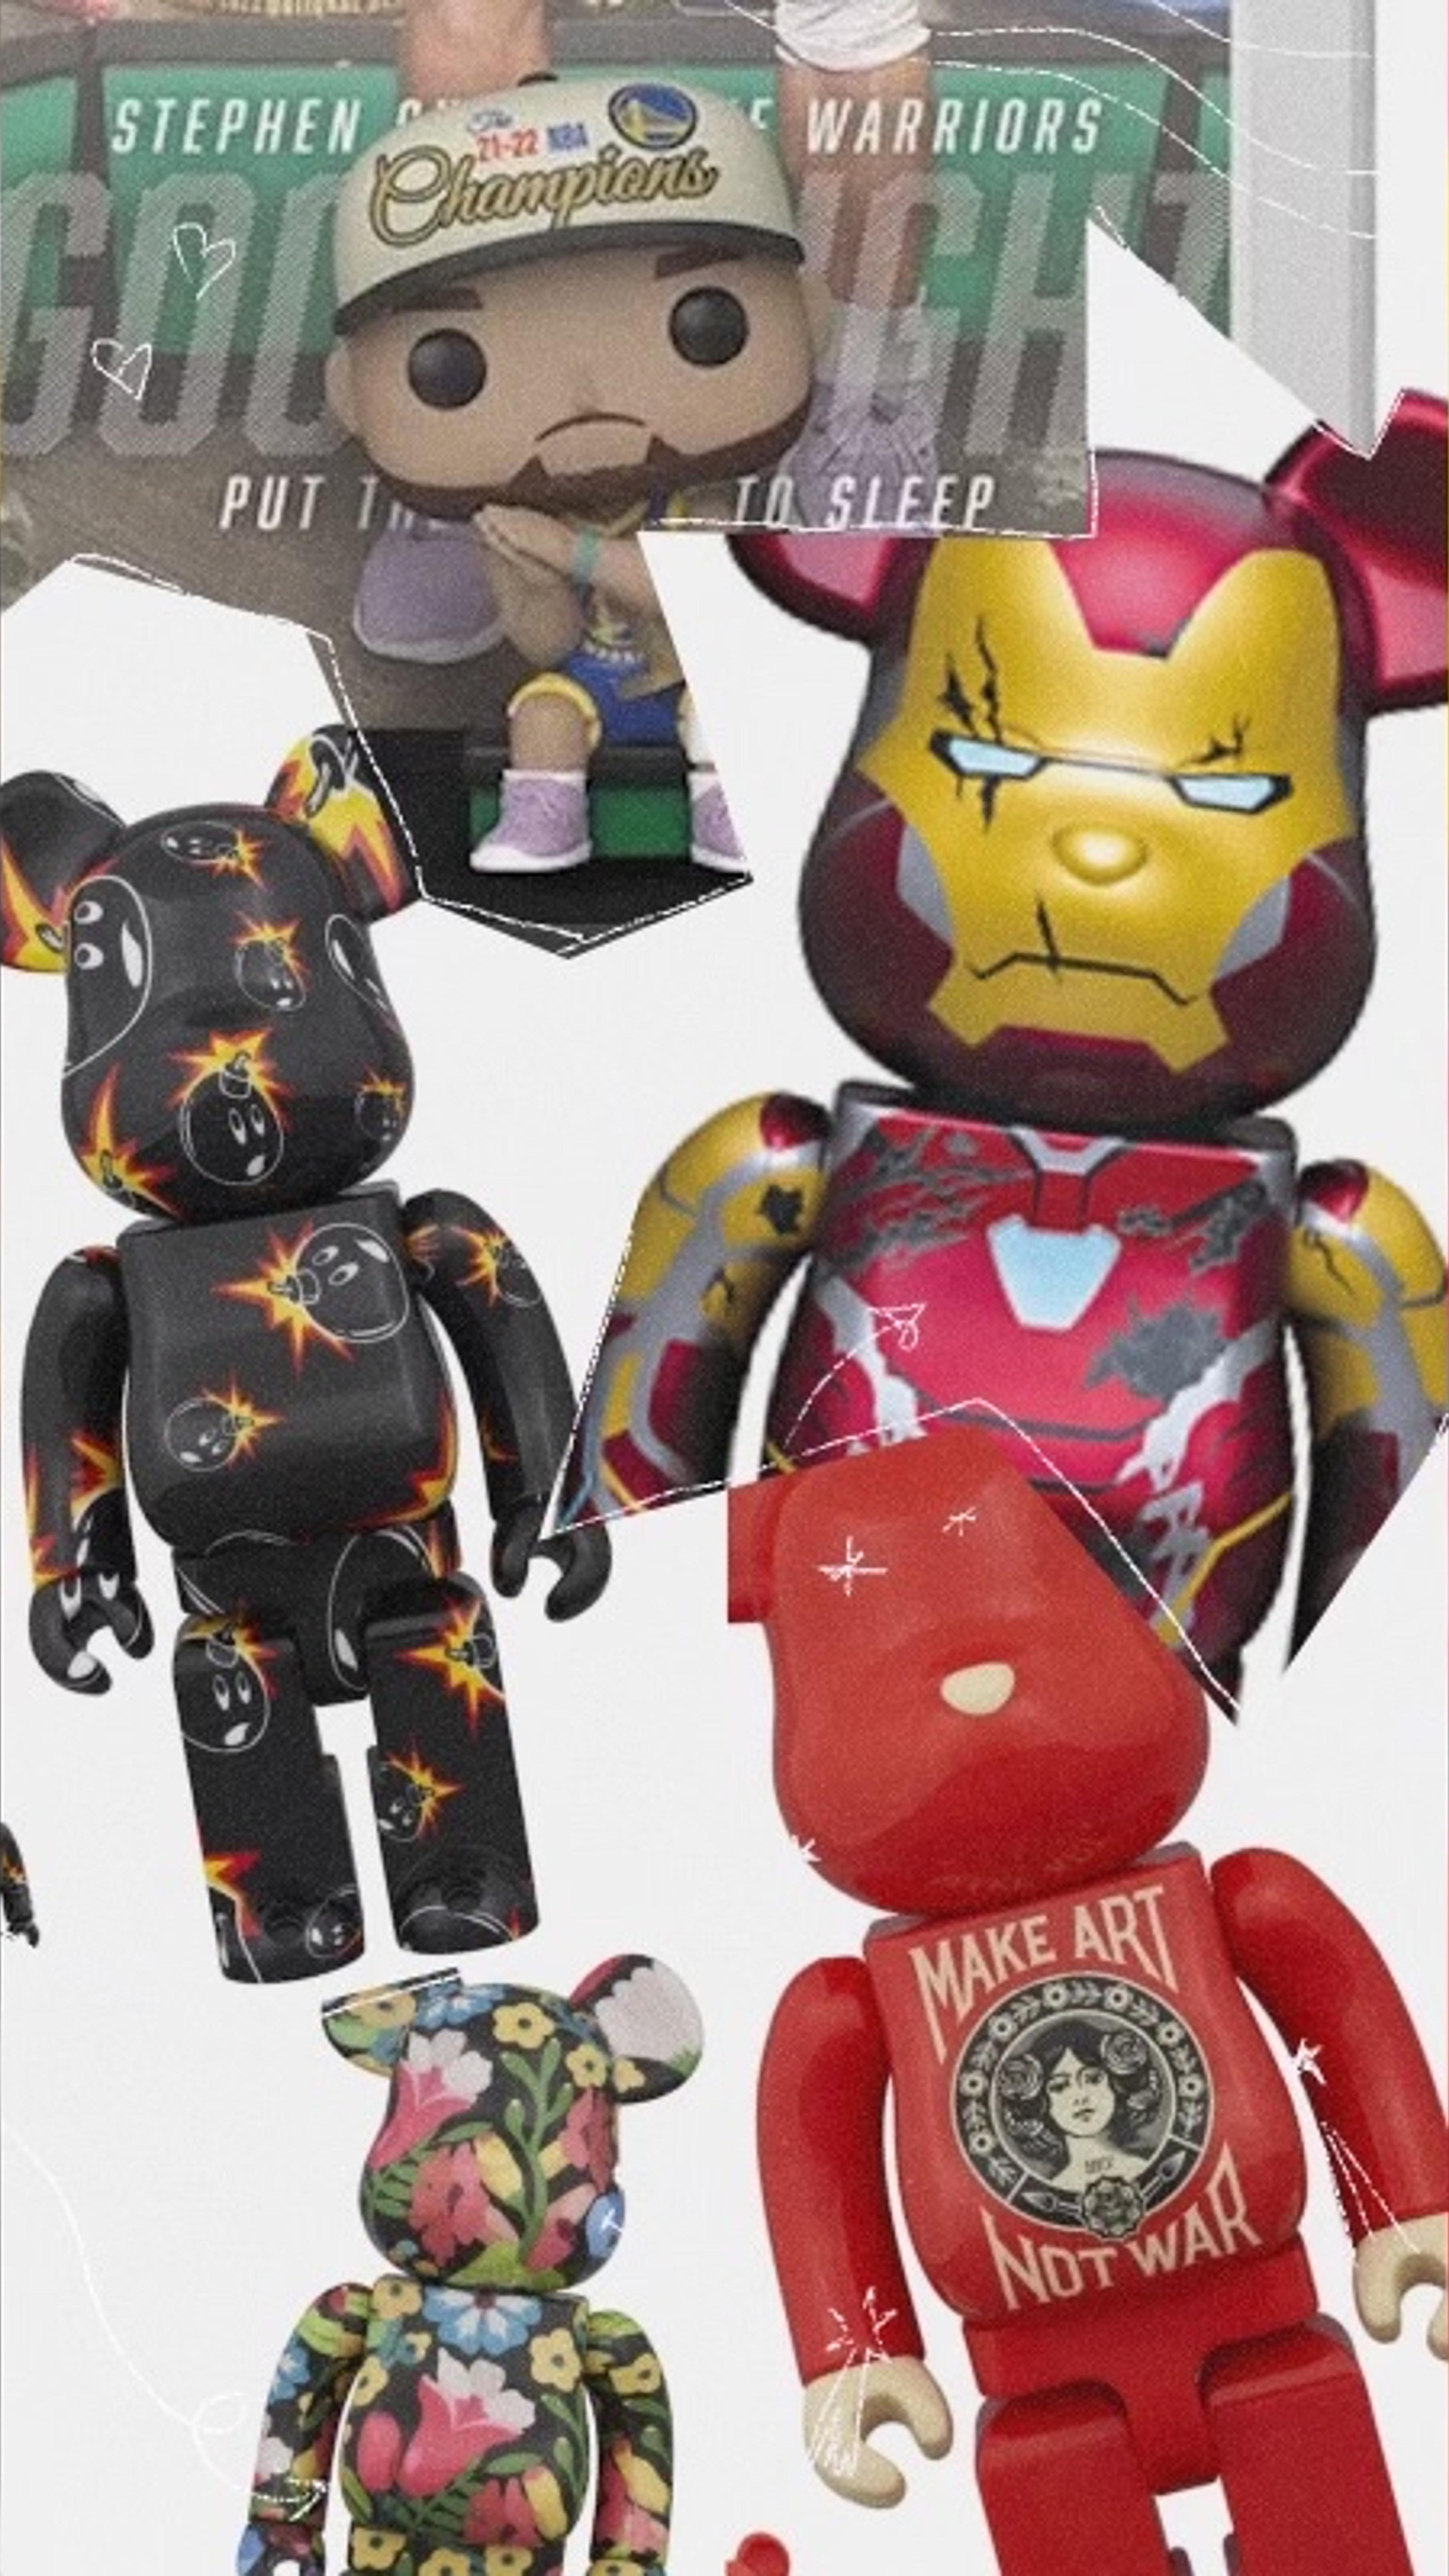 Preview image for the show titled "🔥32x SPOTS, 2x 400% BE@RBRICKS & More!!!🔥" at May 3, 2024